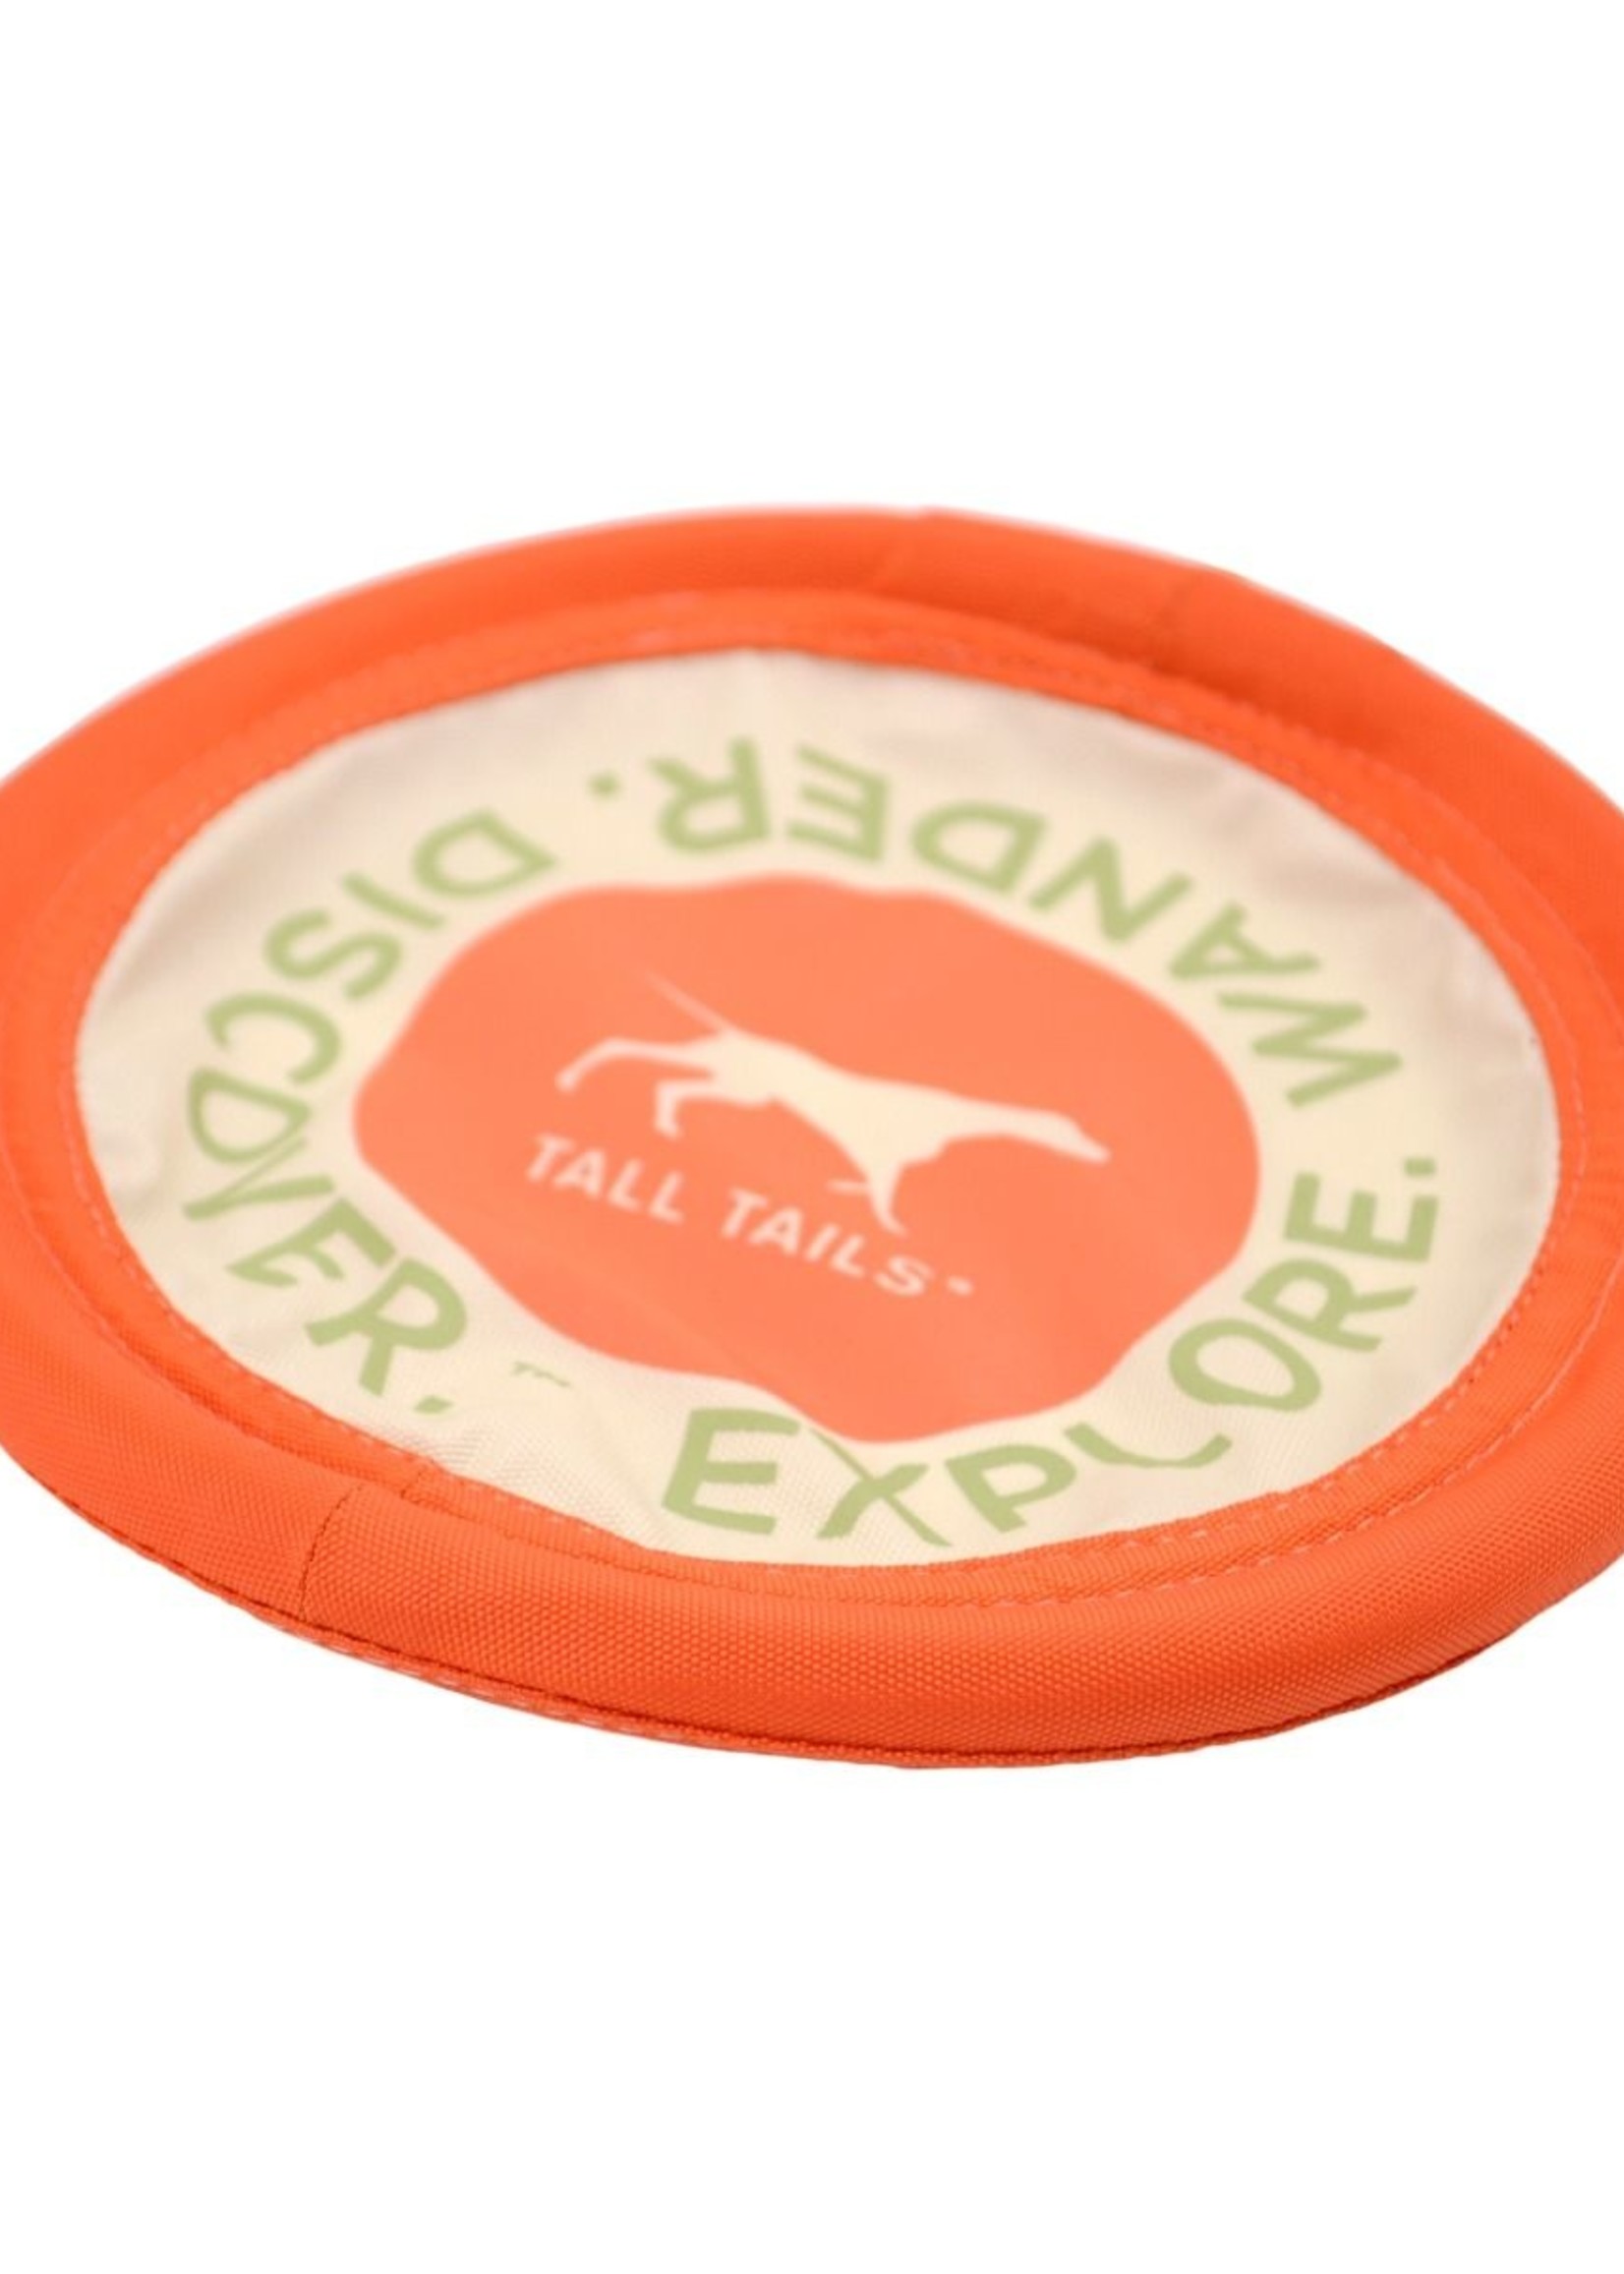 Tall Tails Tall Tails - Flying Disc Orange 7"